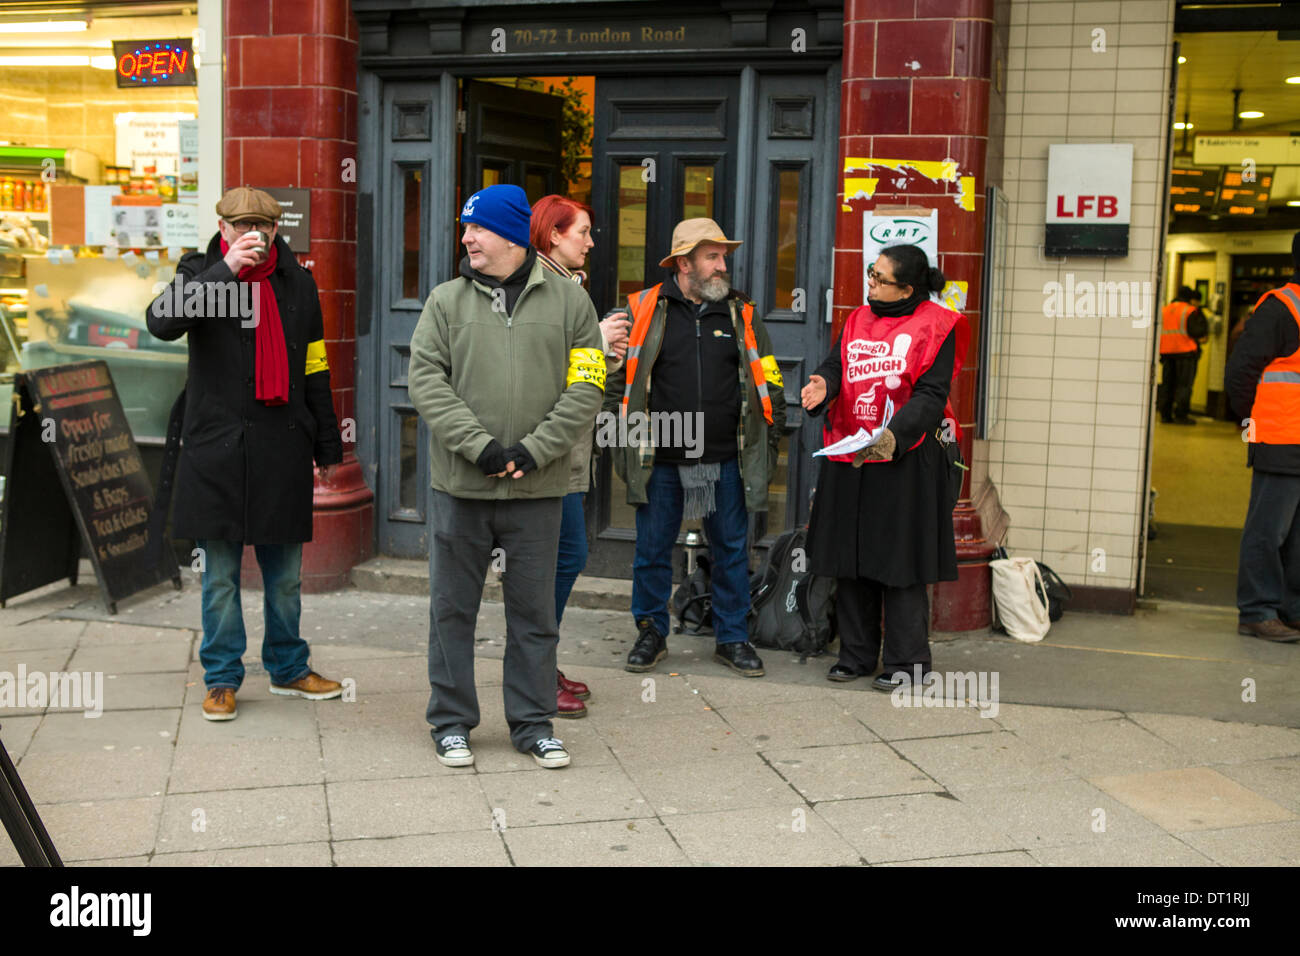 Trade Union activity by RMT and TSSA unions outside Elephant and Castle Underground Station, London Stock Photo